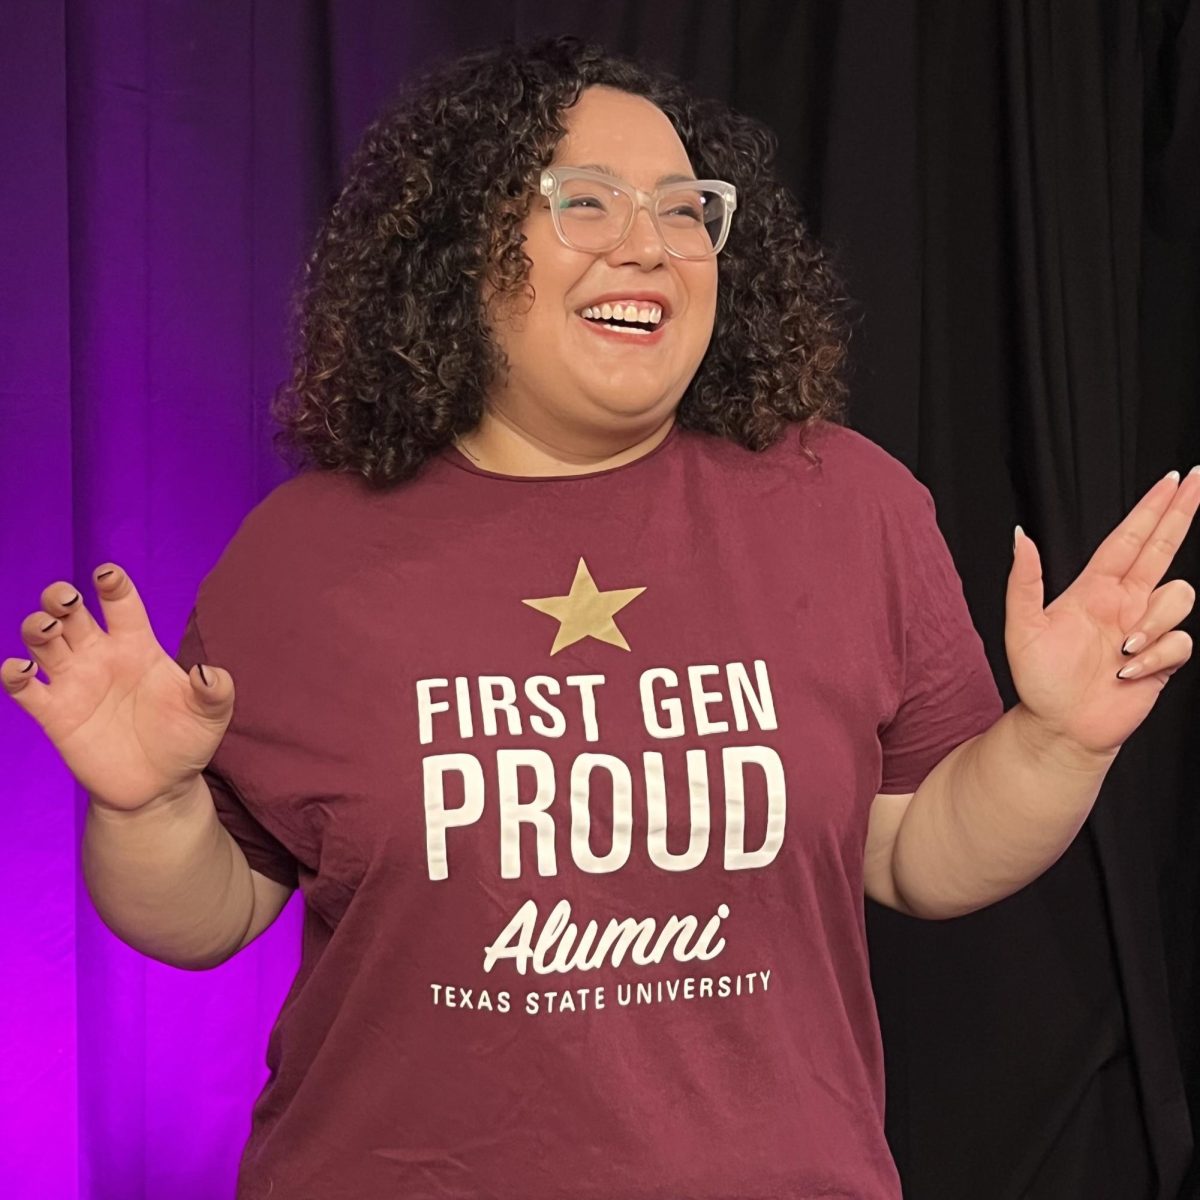 Camrie Pipper poses proud in her First-Gen Proud alumni shirt, Friday, Sept. 22, 2023, at Texas State University.